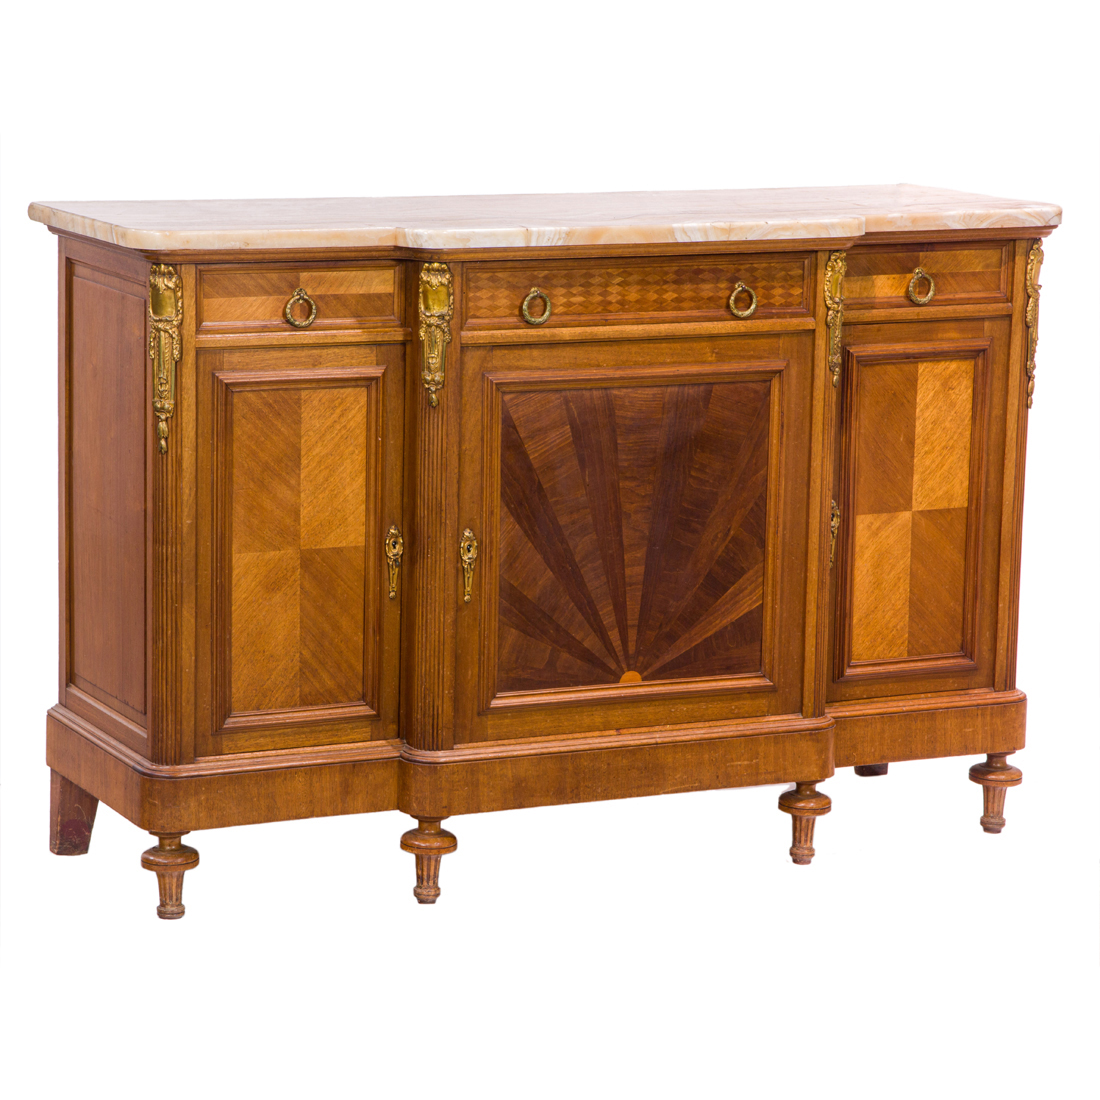 NEOCLASSICAL STYLE SIDEBOARD Neoclassical